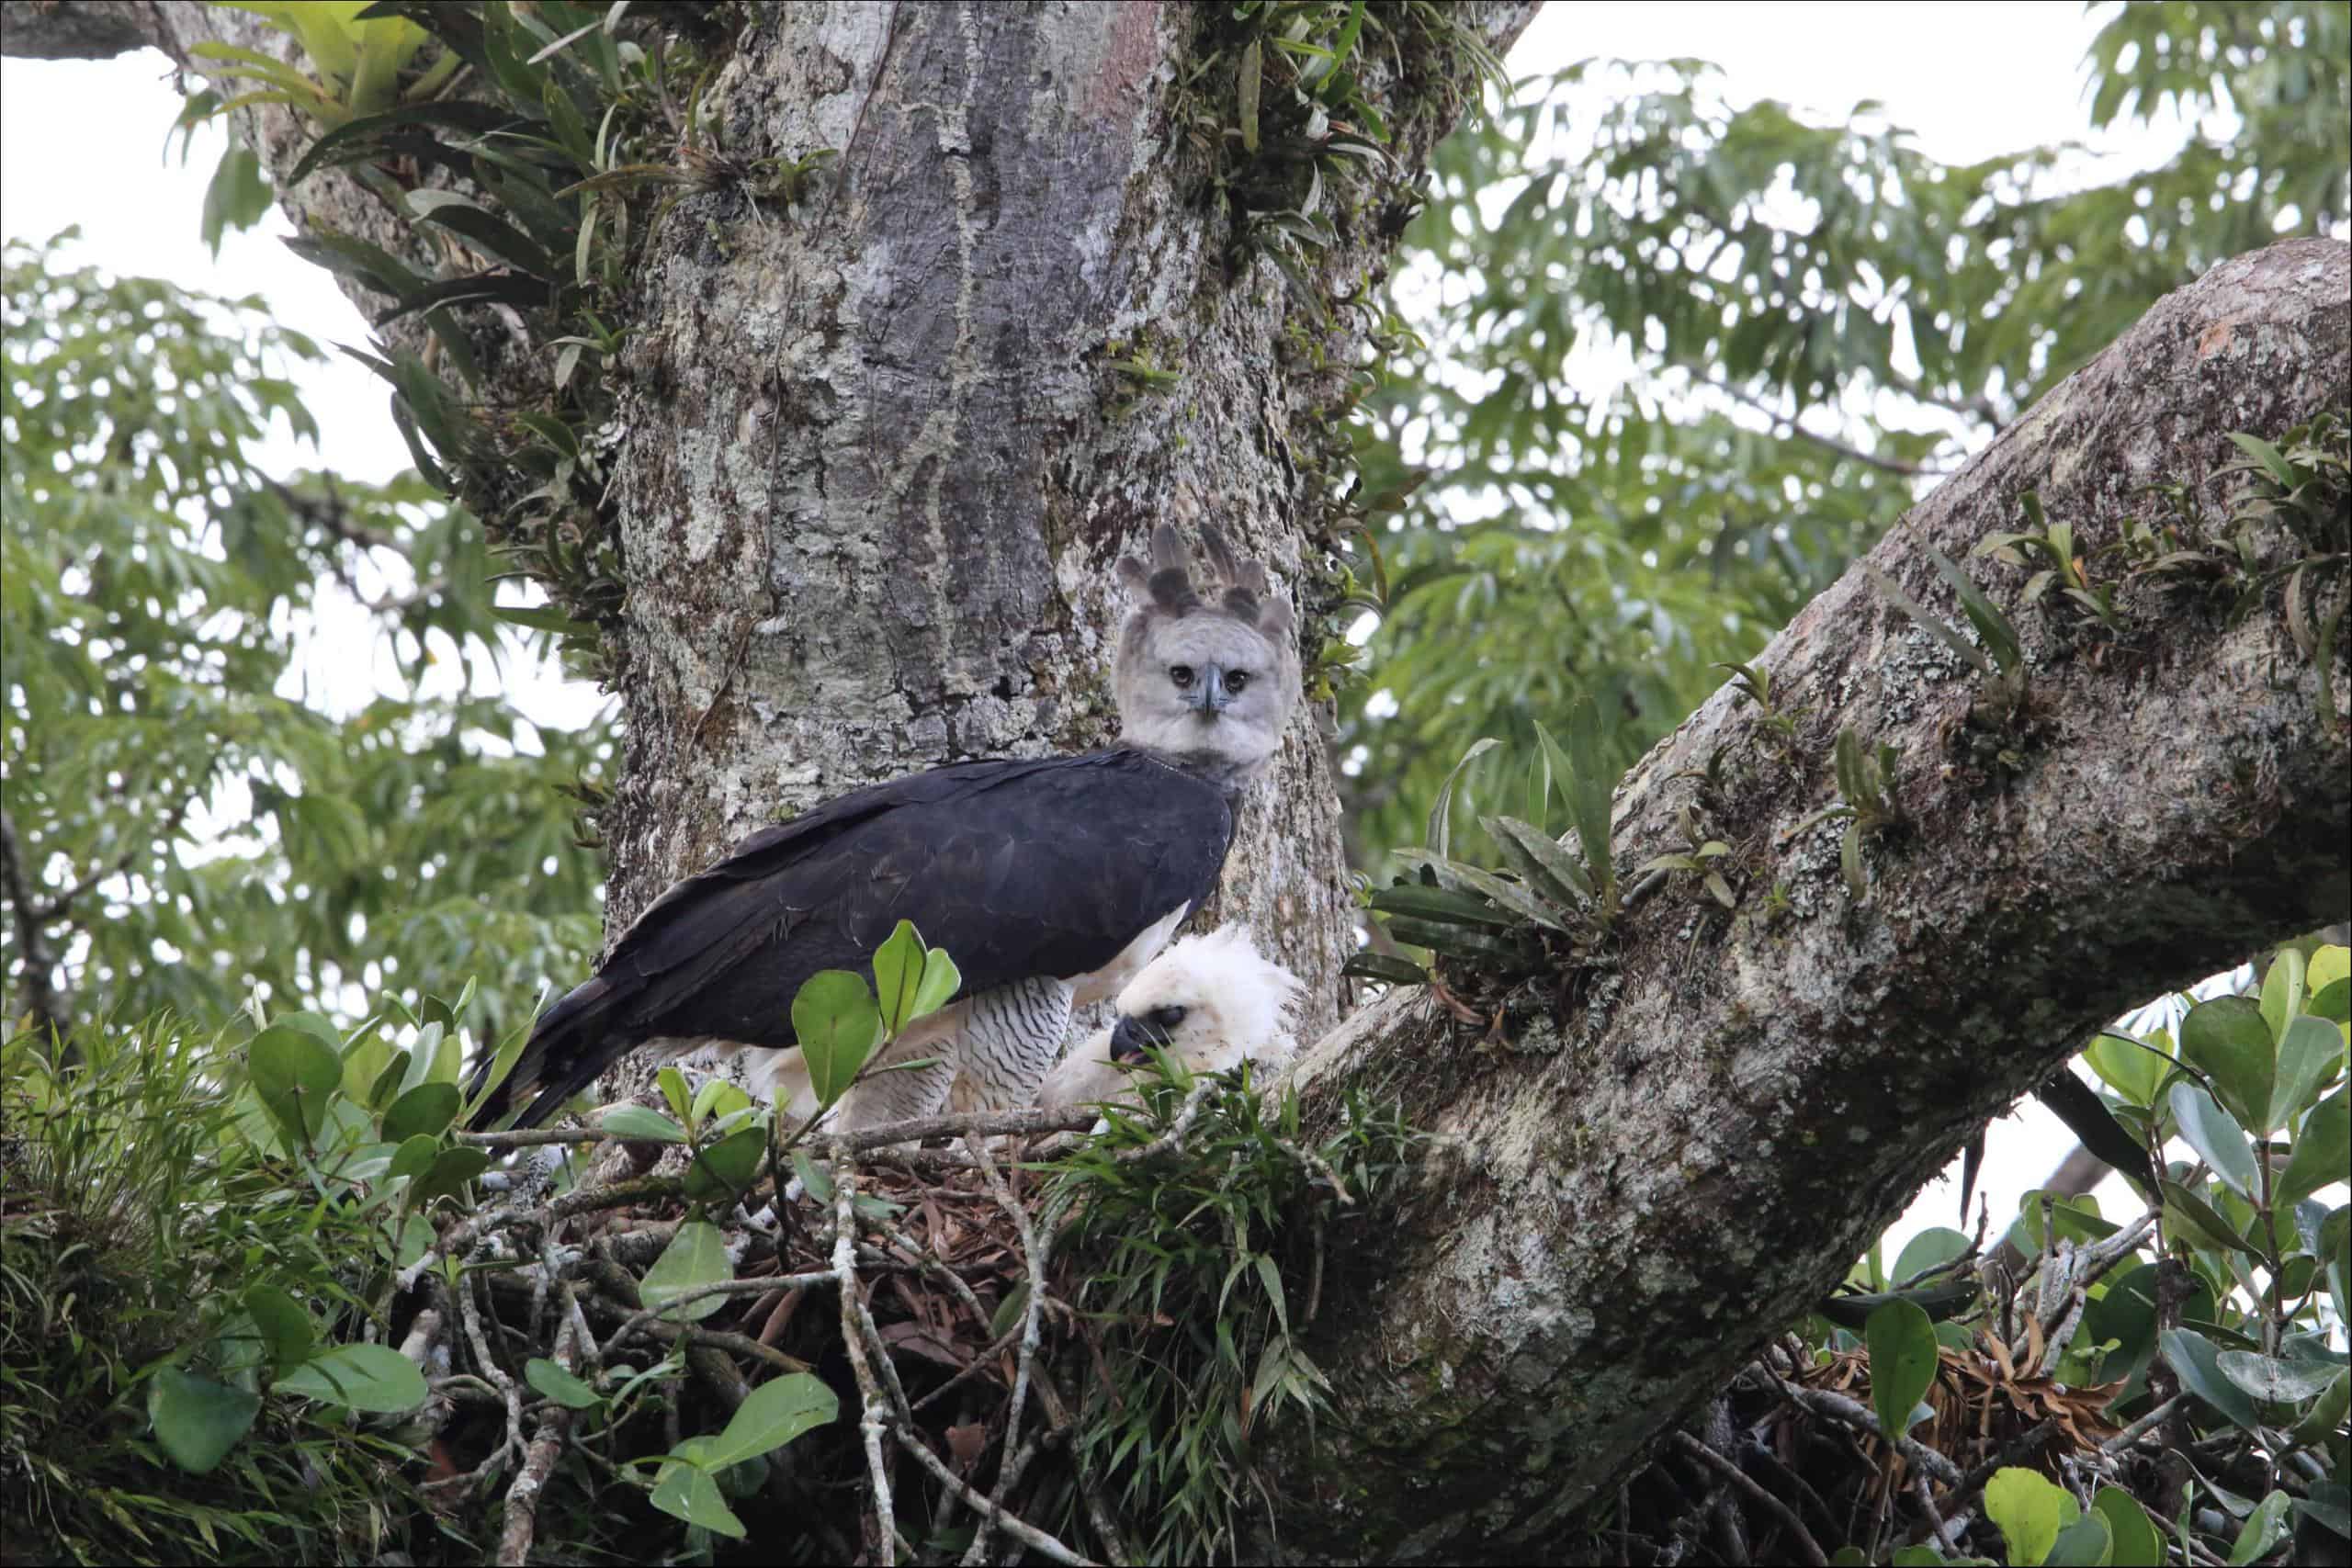 Harpy Eagle Open Wings  Nature and wildlife image collection